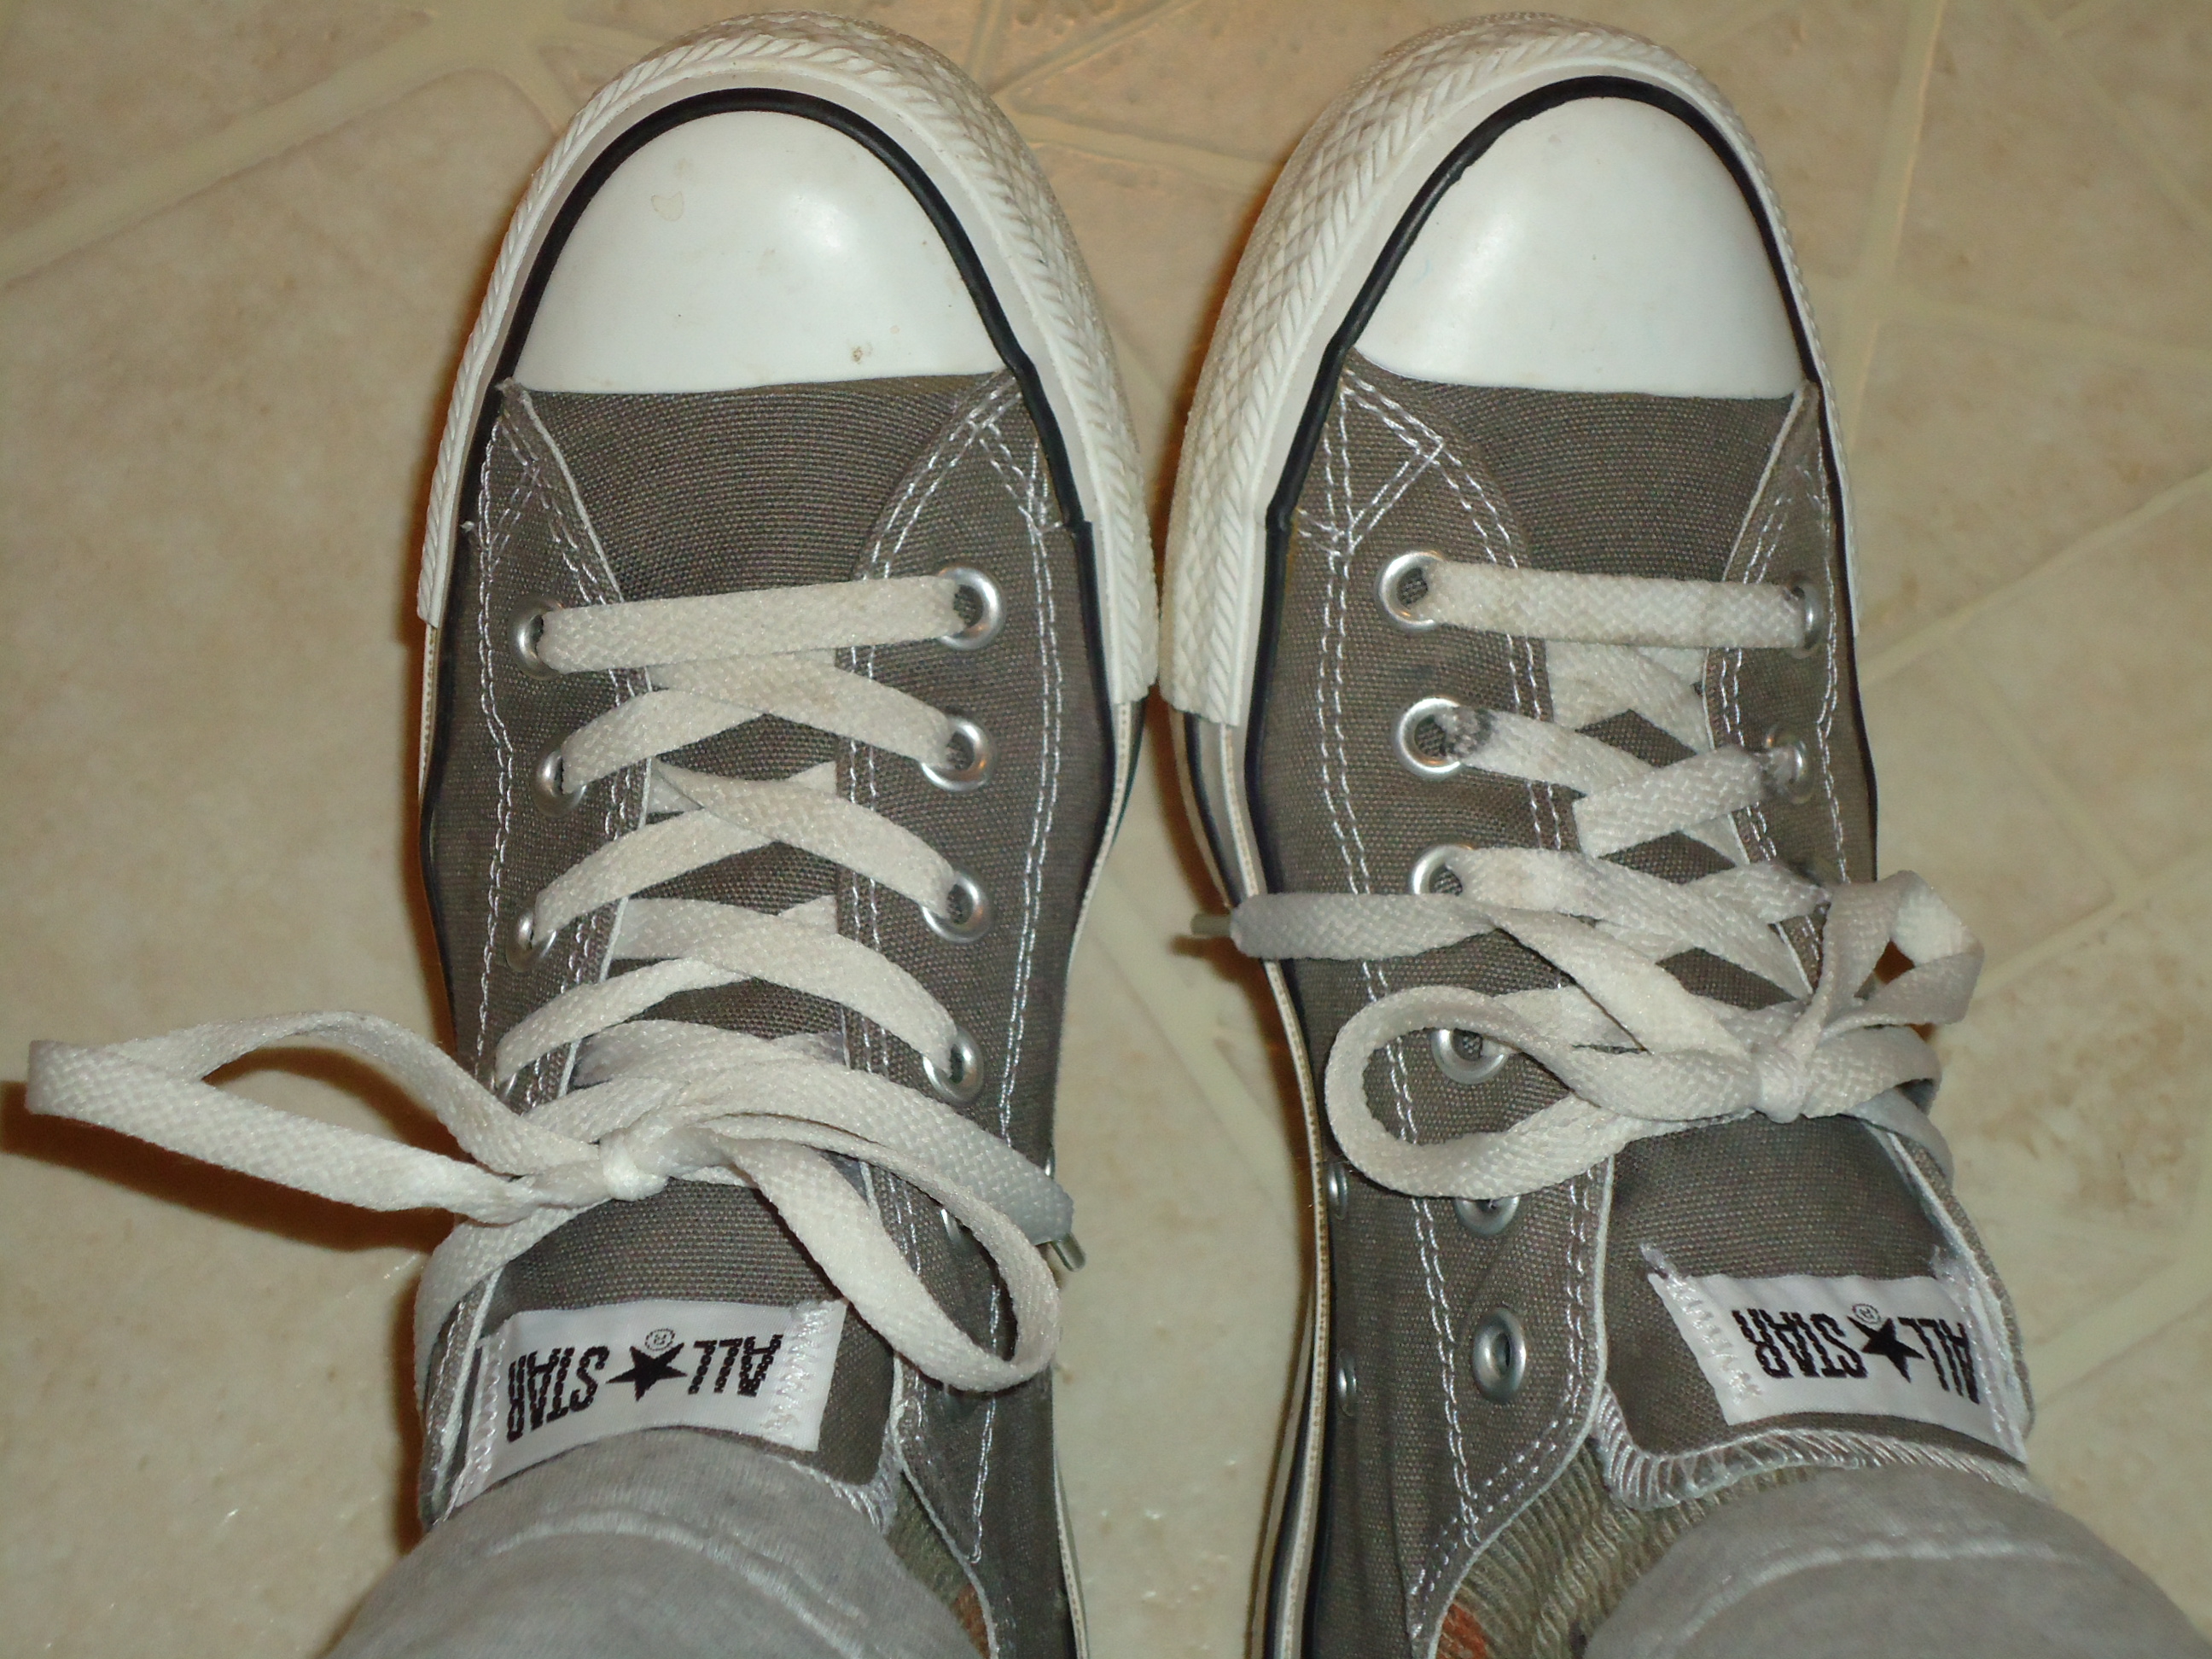 how long are converse high top shoelaces